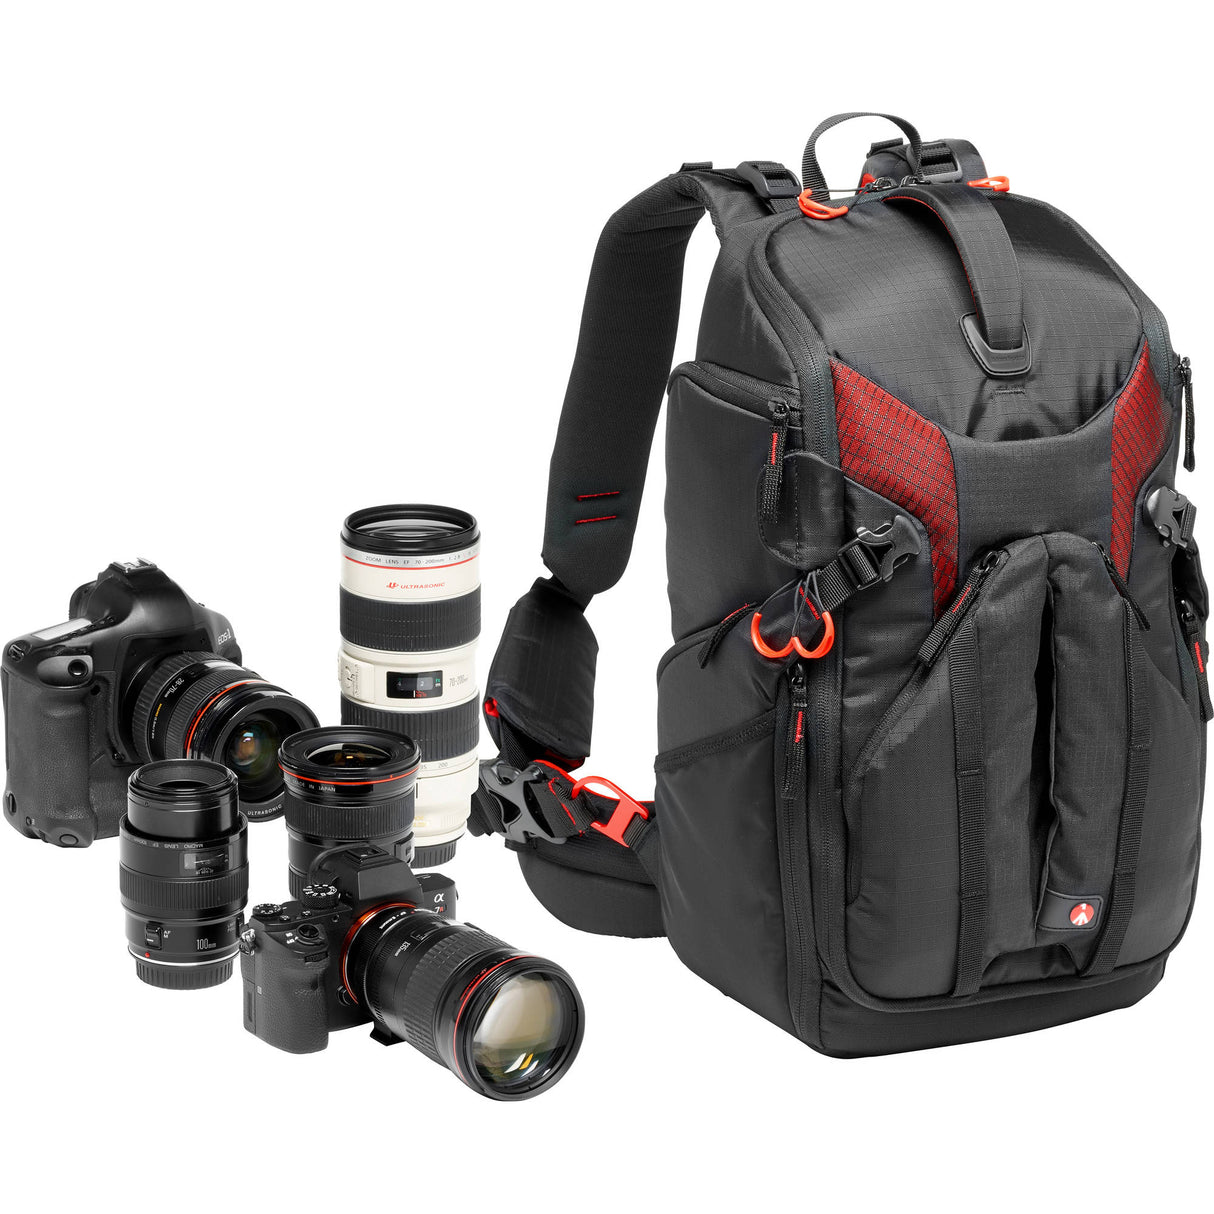 Manfrotto Pro Light 3N1-26 Camera Backpack (Black)